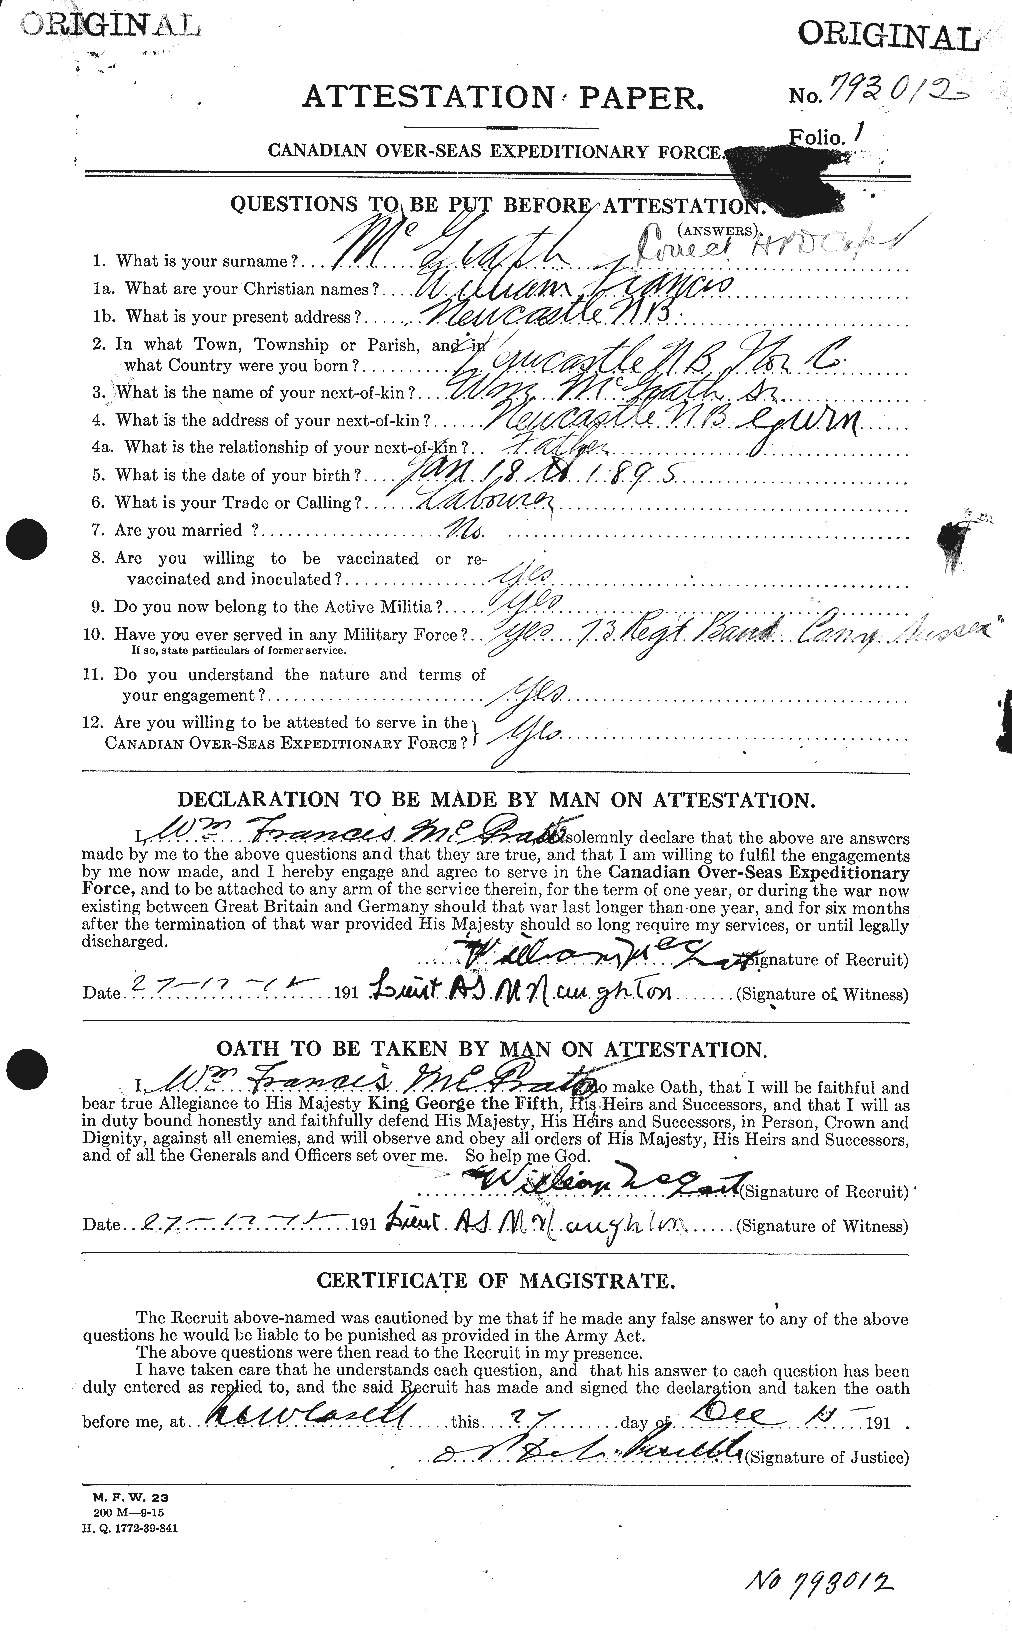 Personnel Records of the First World War - CEF 523700a